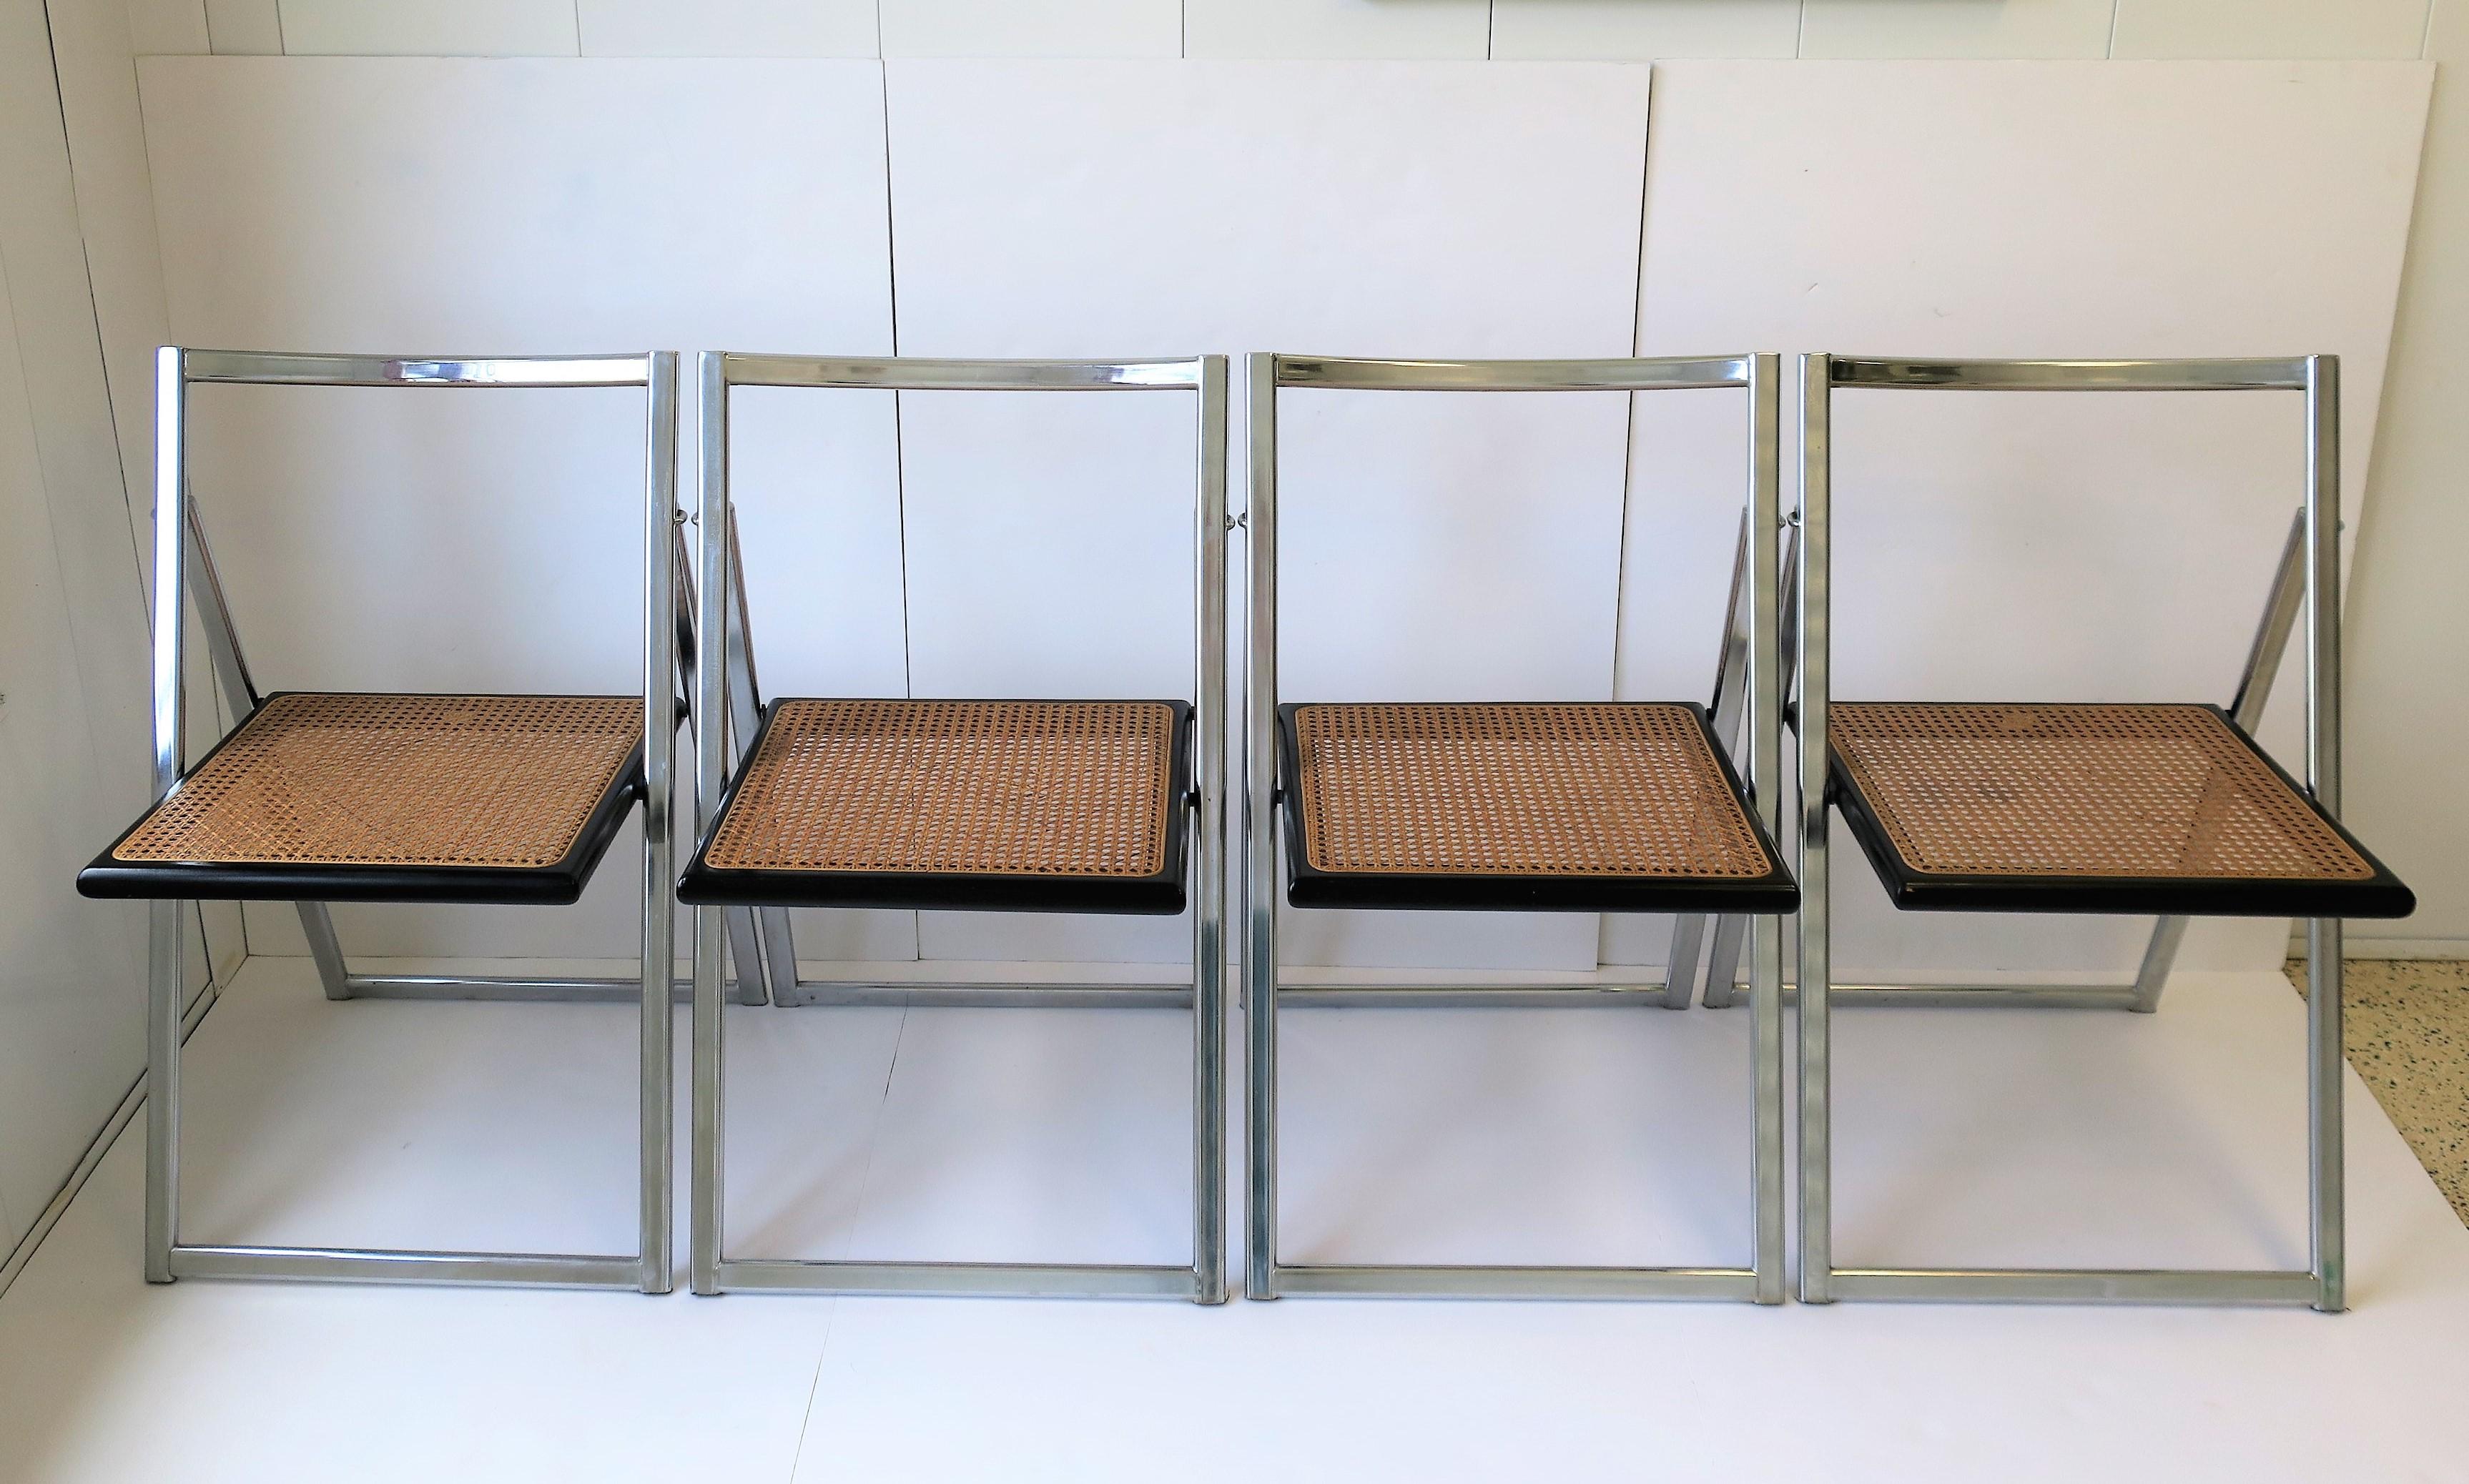 A beautiful set of four (4) Italian Midcentury Modern to Postmodern period chrome, black wood and cane seat folding chairs, attributed to Italian design house Arrben, circa 1960s - 1970s, Italy. Marked 